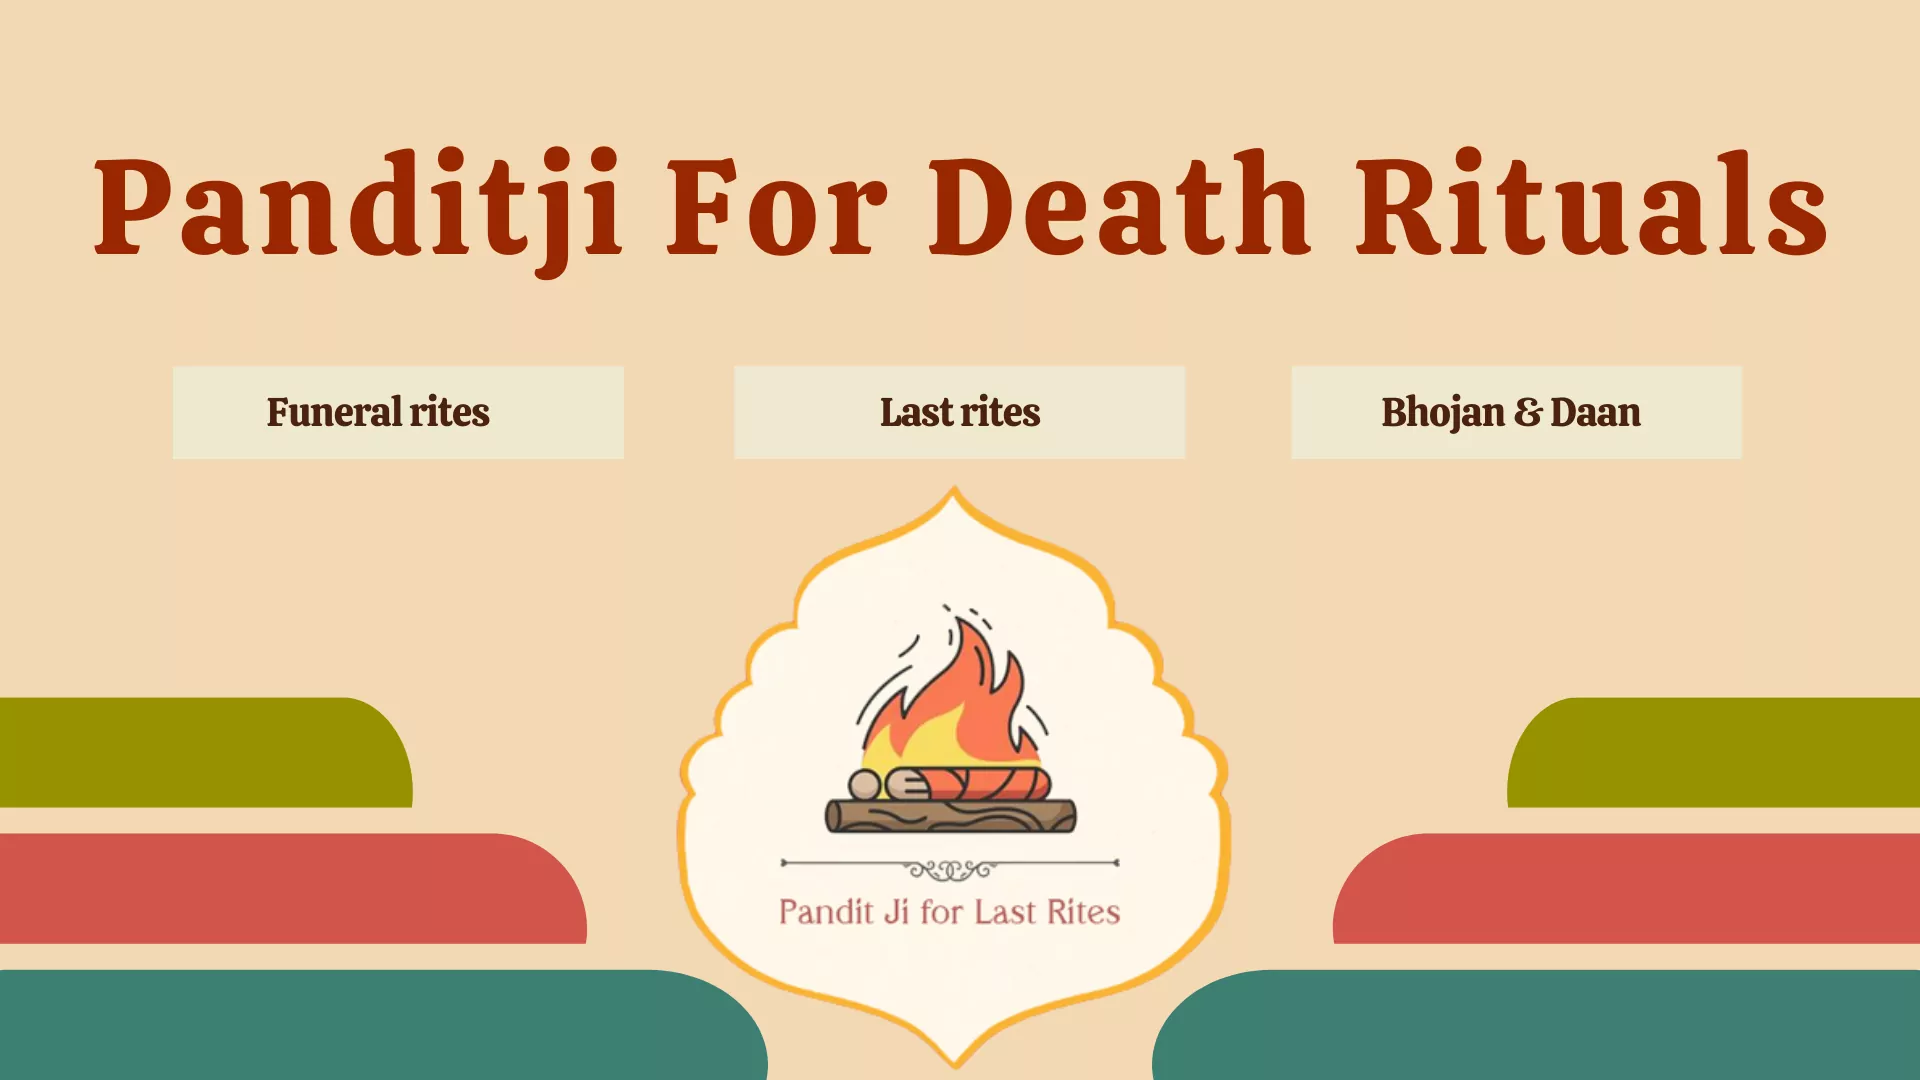 Panditji for funeral services